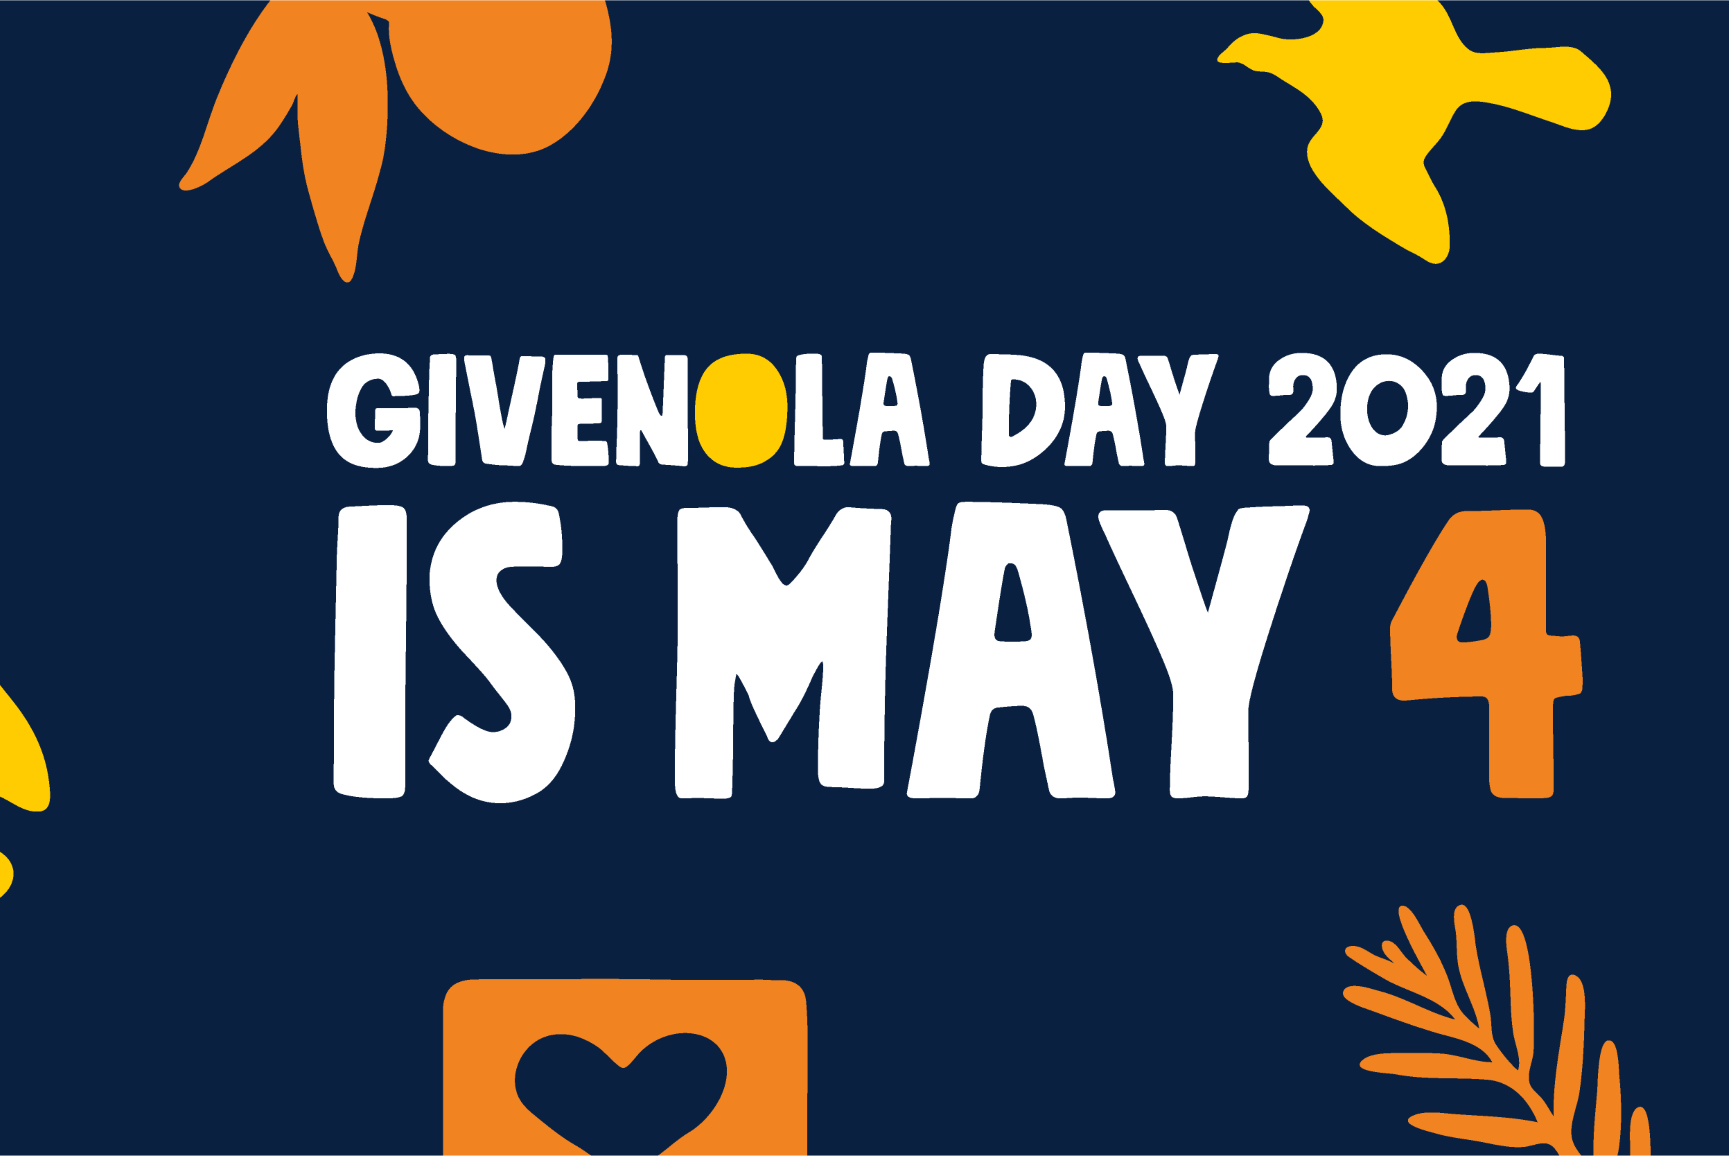 Support BCM today for #GiveNOLADay!